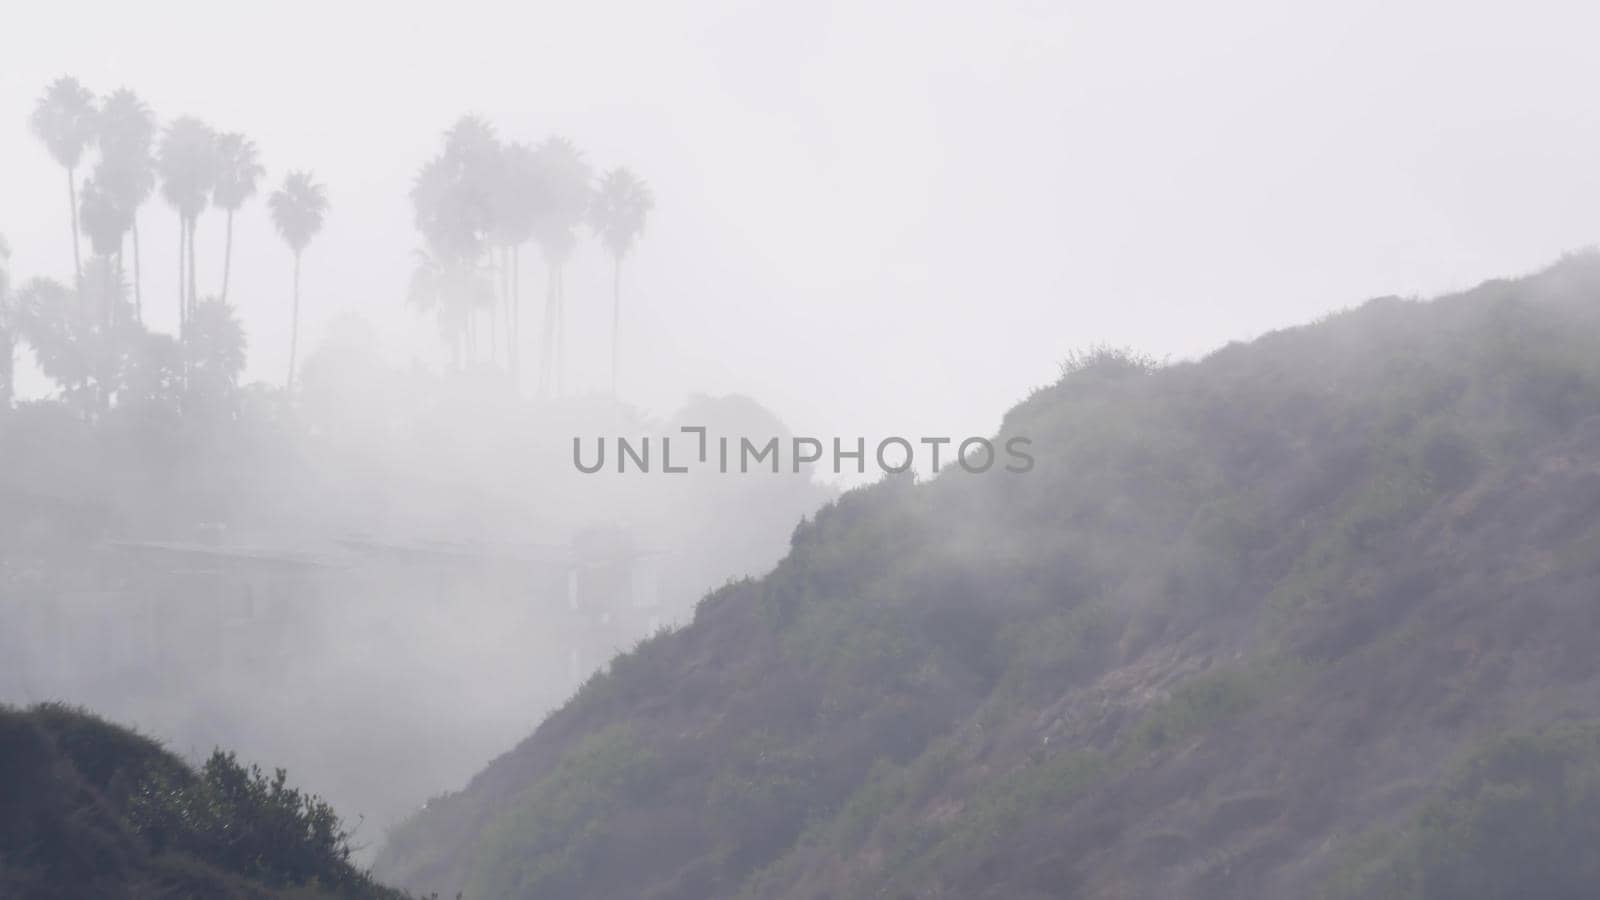 Palm trees on cliff or bluff, foggy weather, California coast, misty white air. by DogoraSun